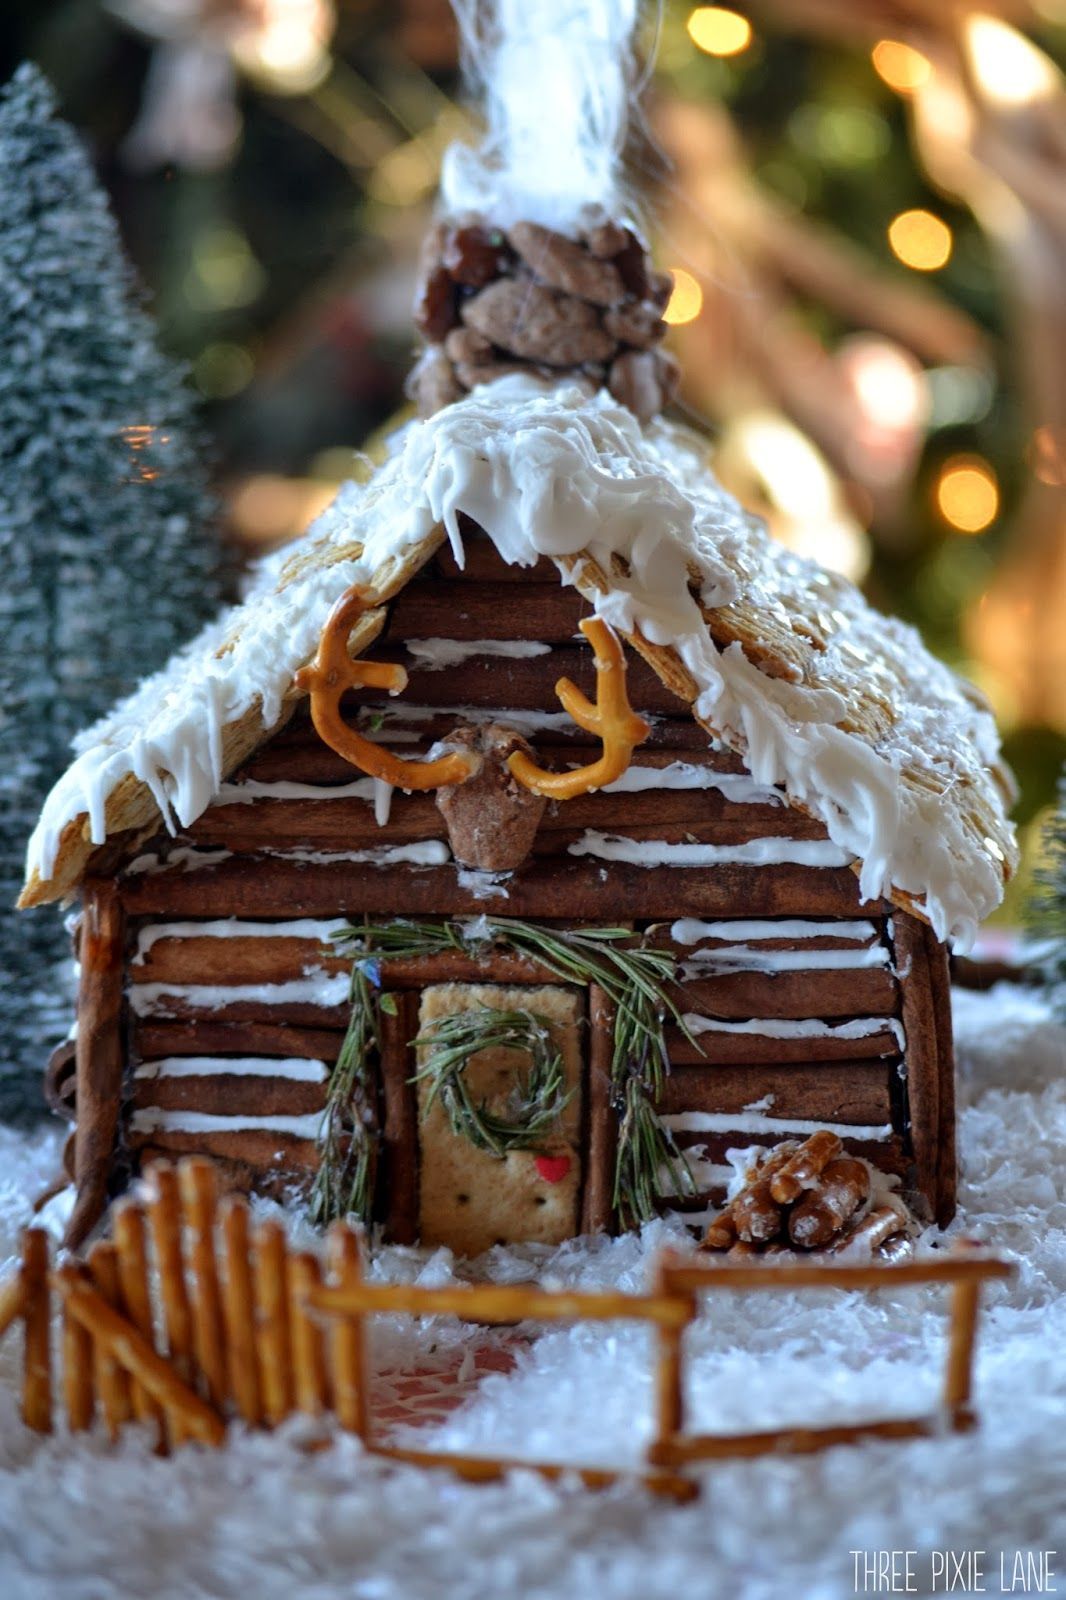 18 ginger bread house decorations christmas gingerbread ideas